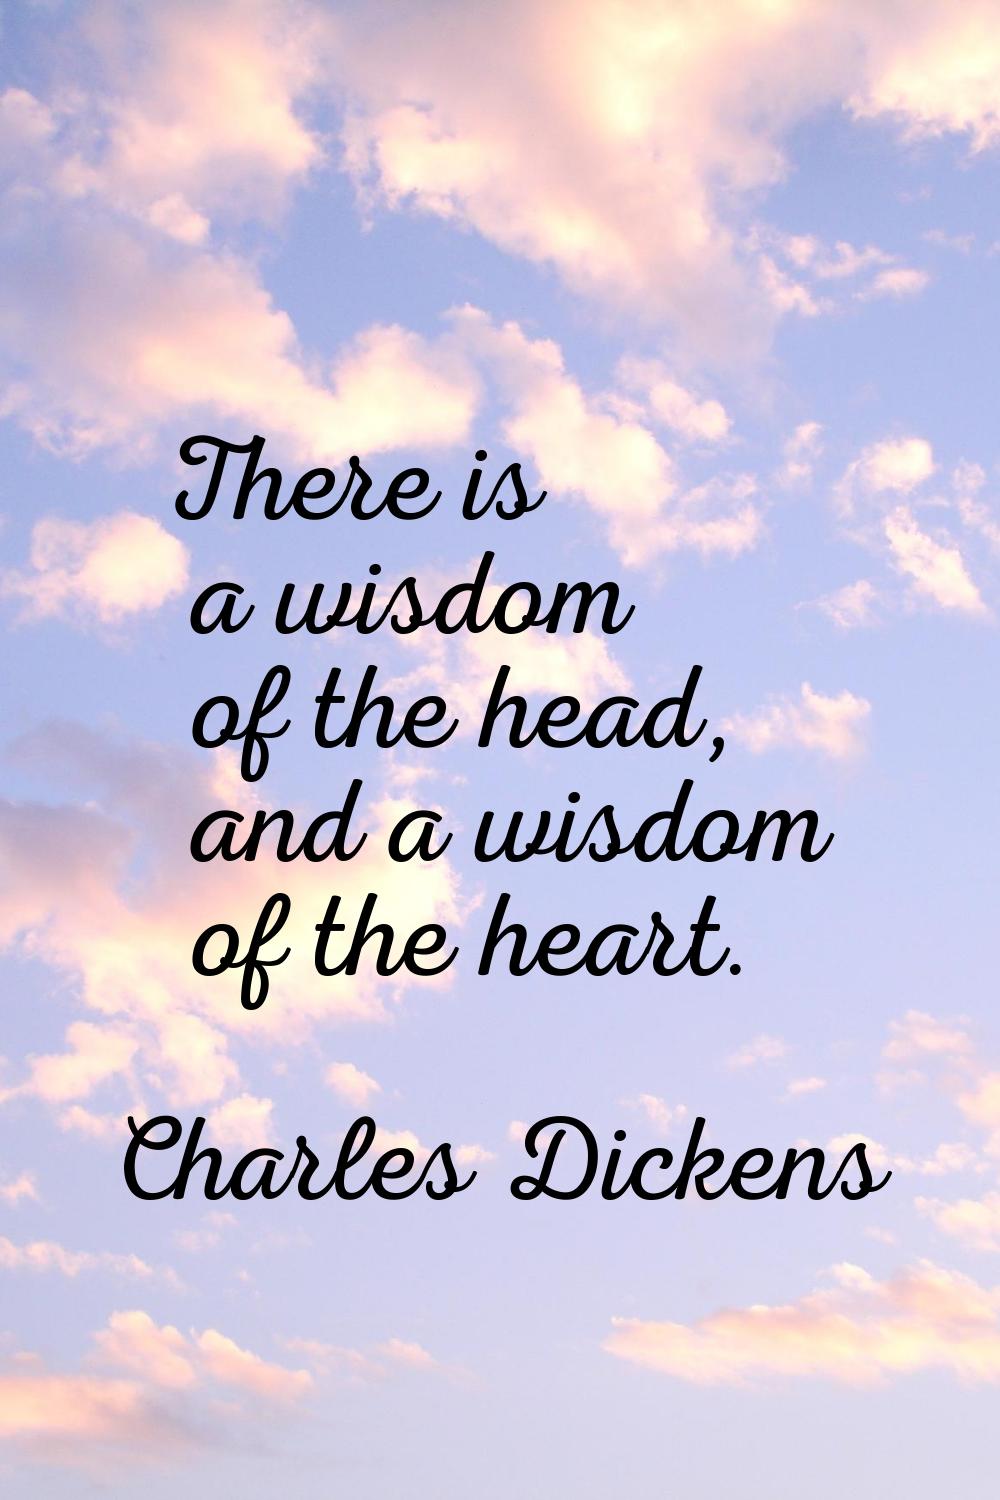 There is a wisdom of the head, and a wisdom of the heart.